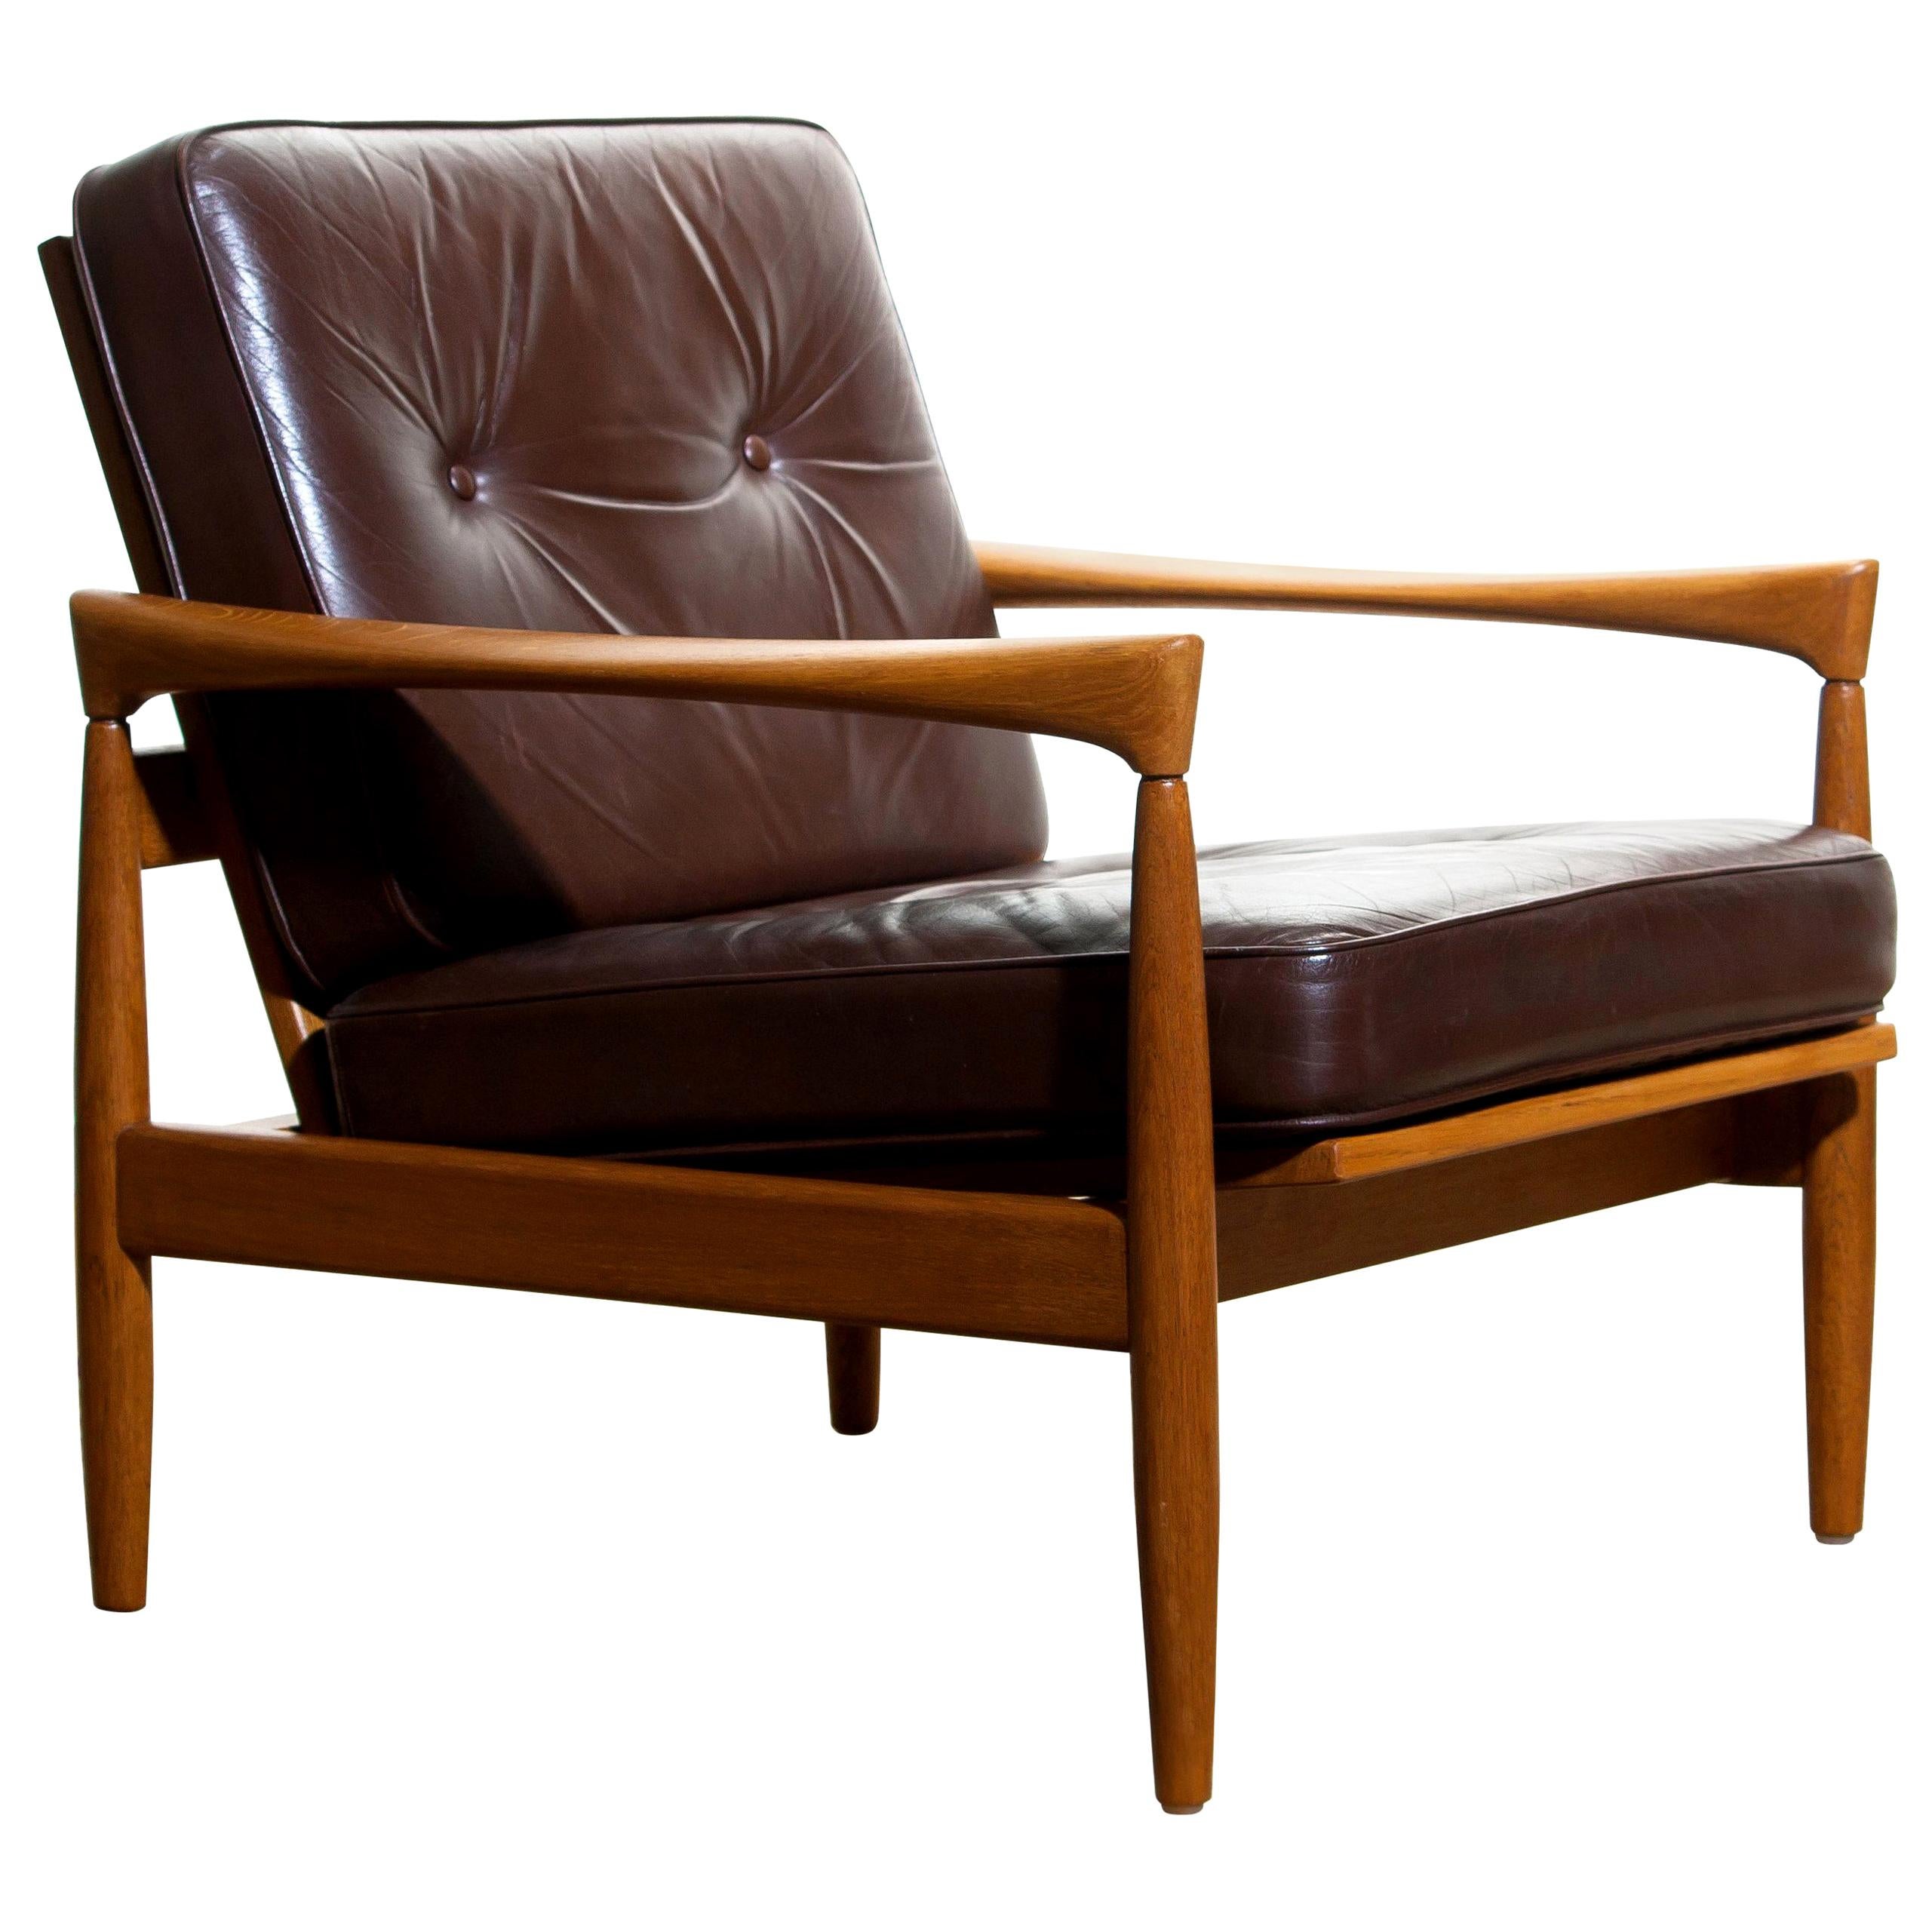 1960s, Oak and Brown Leather Lounge Chair by Erik Wörtz for Bröderna Anderssons